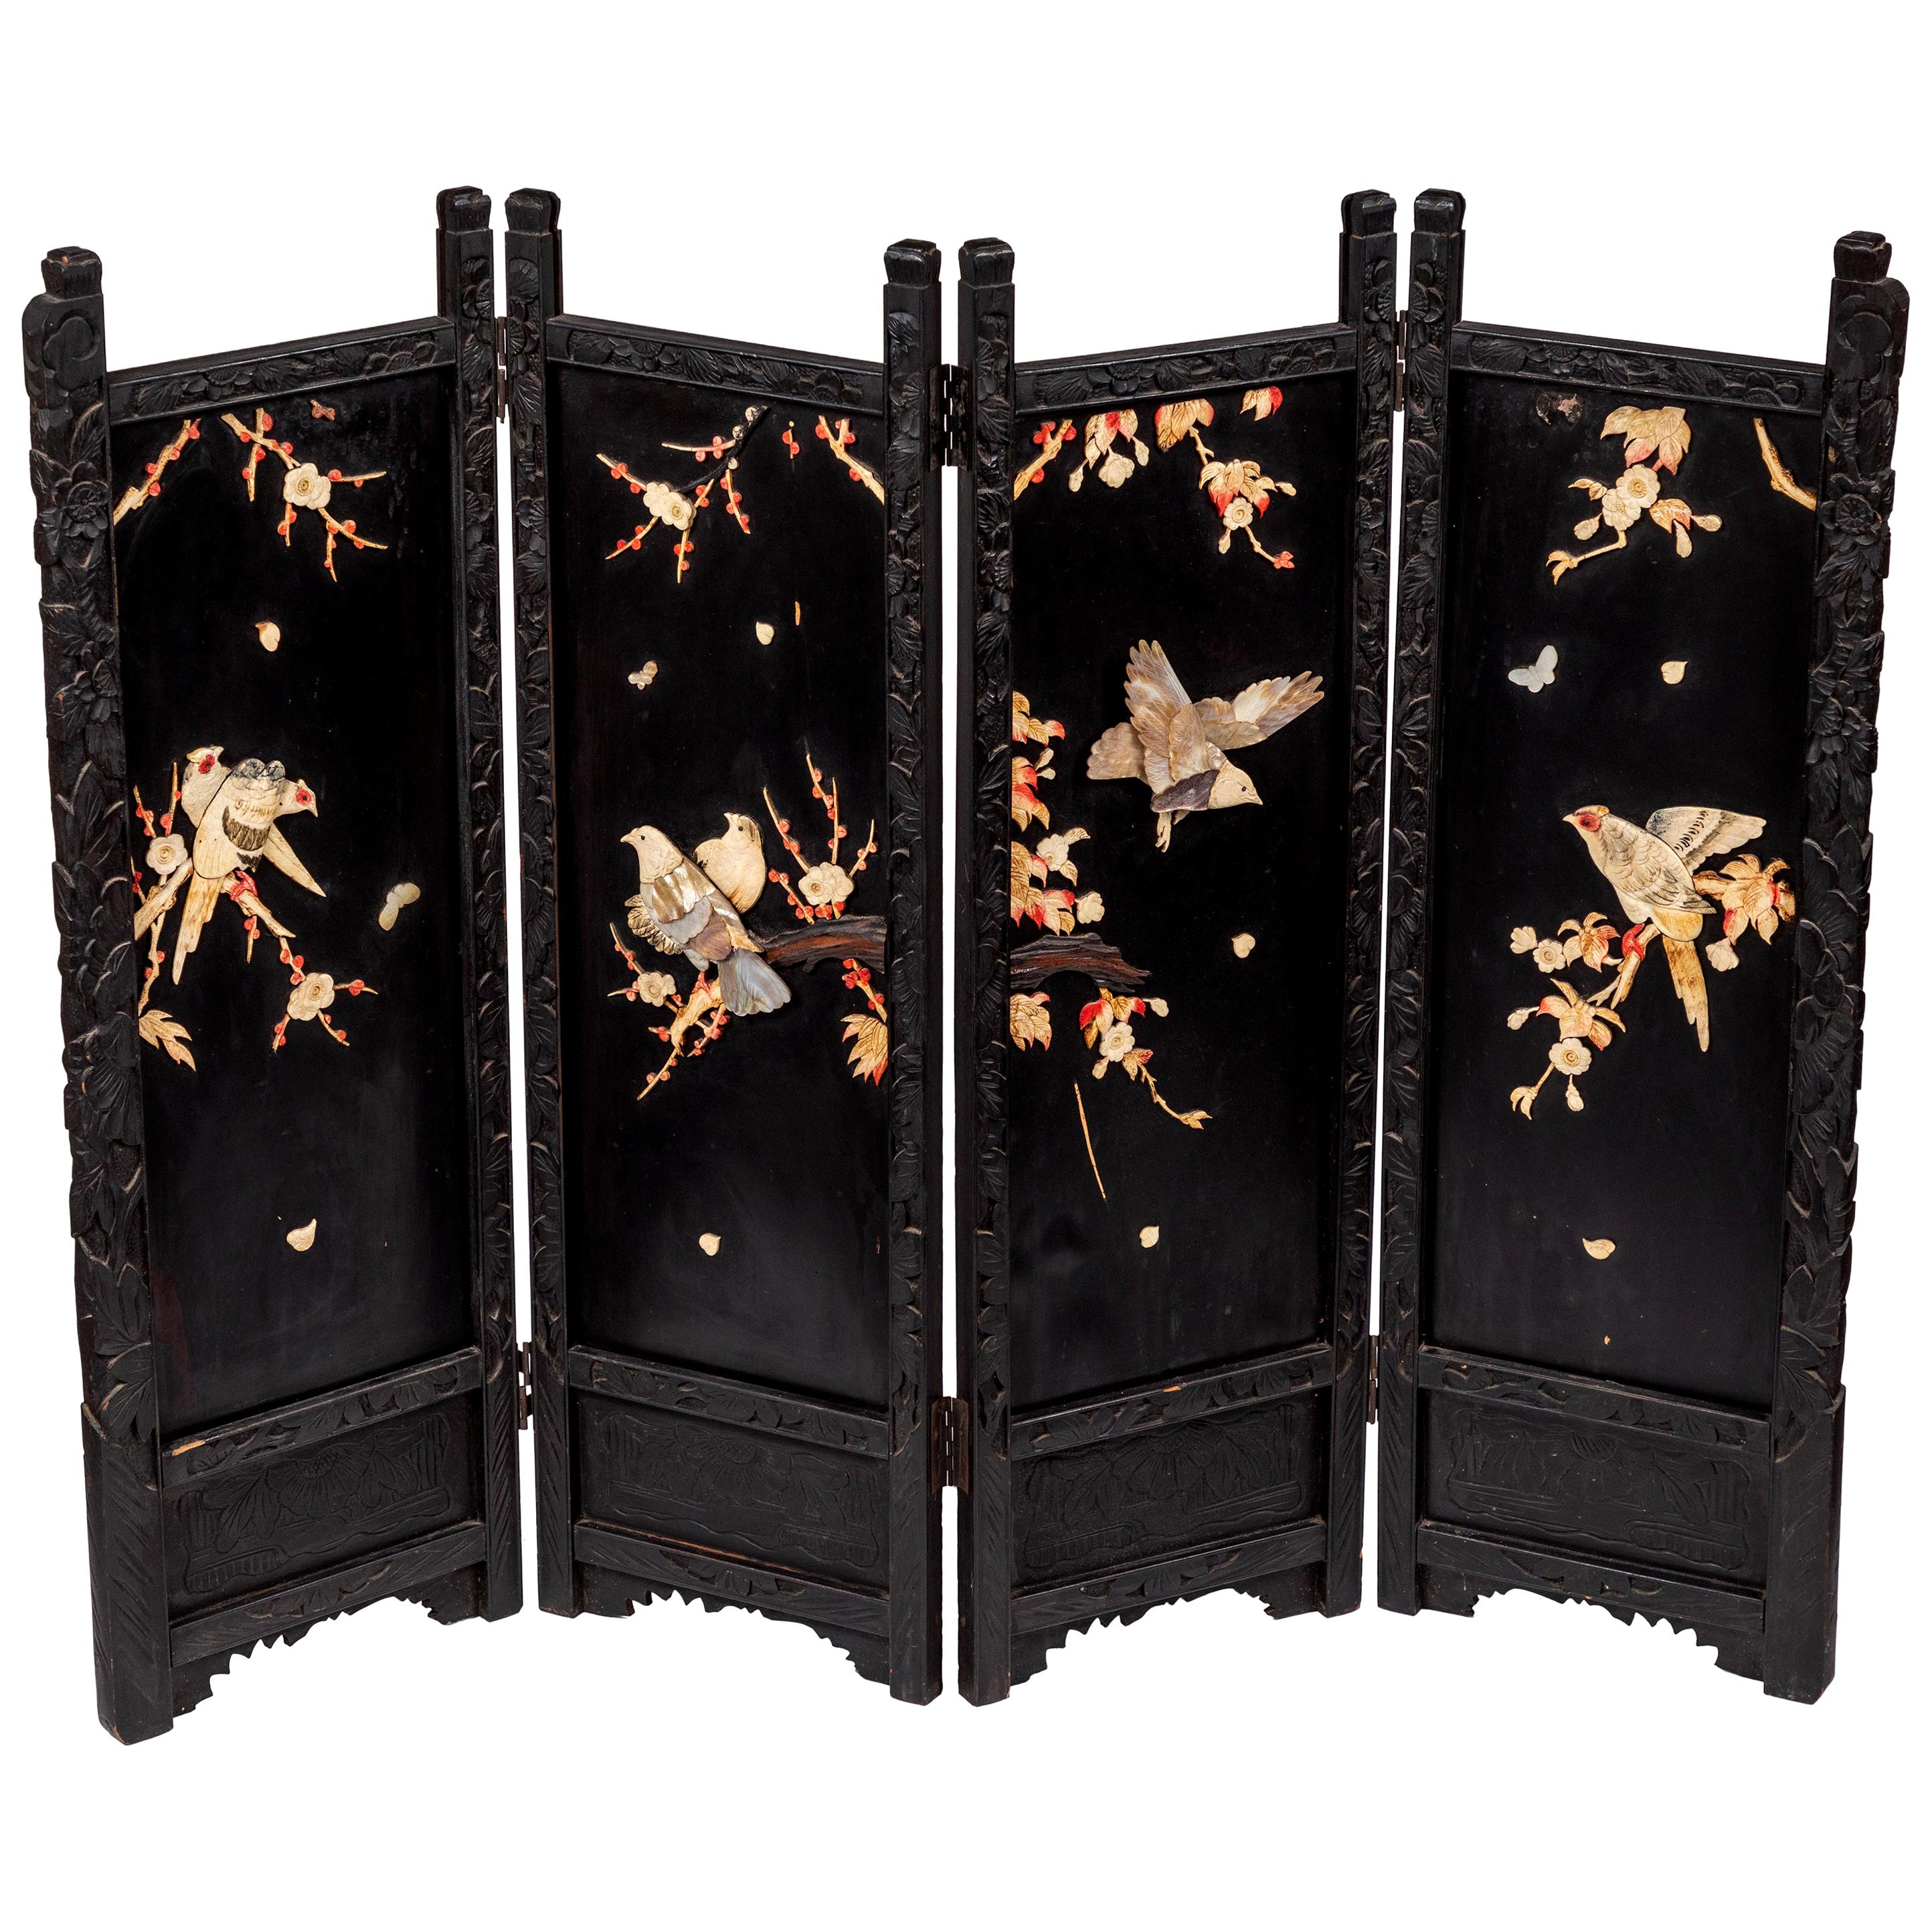 Antique Japanese Hand Carved, Black Lacquer Table Top 4-Panel Folding Screen